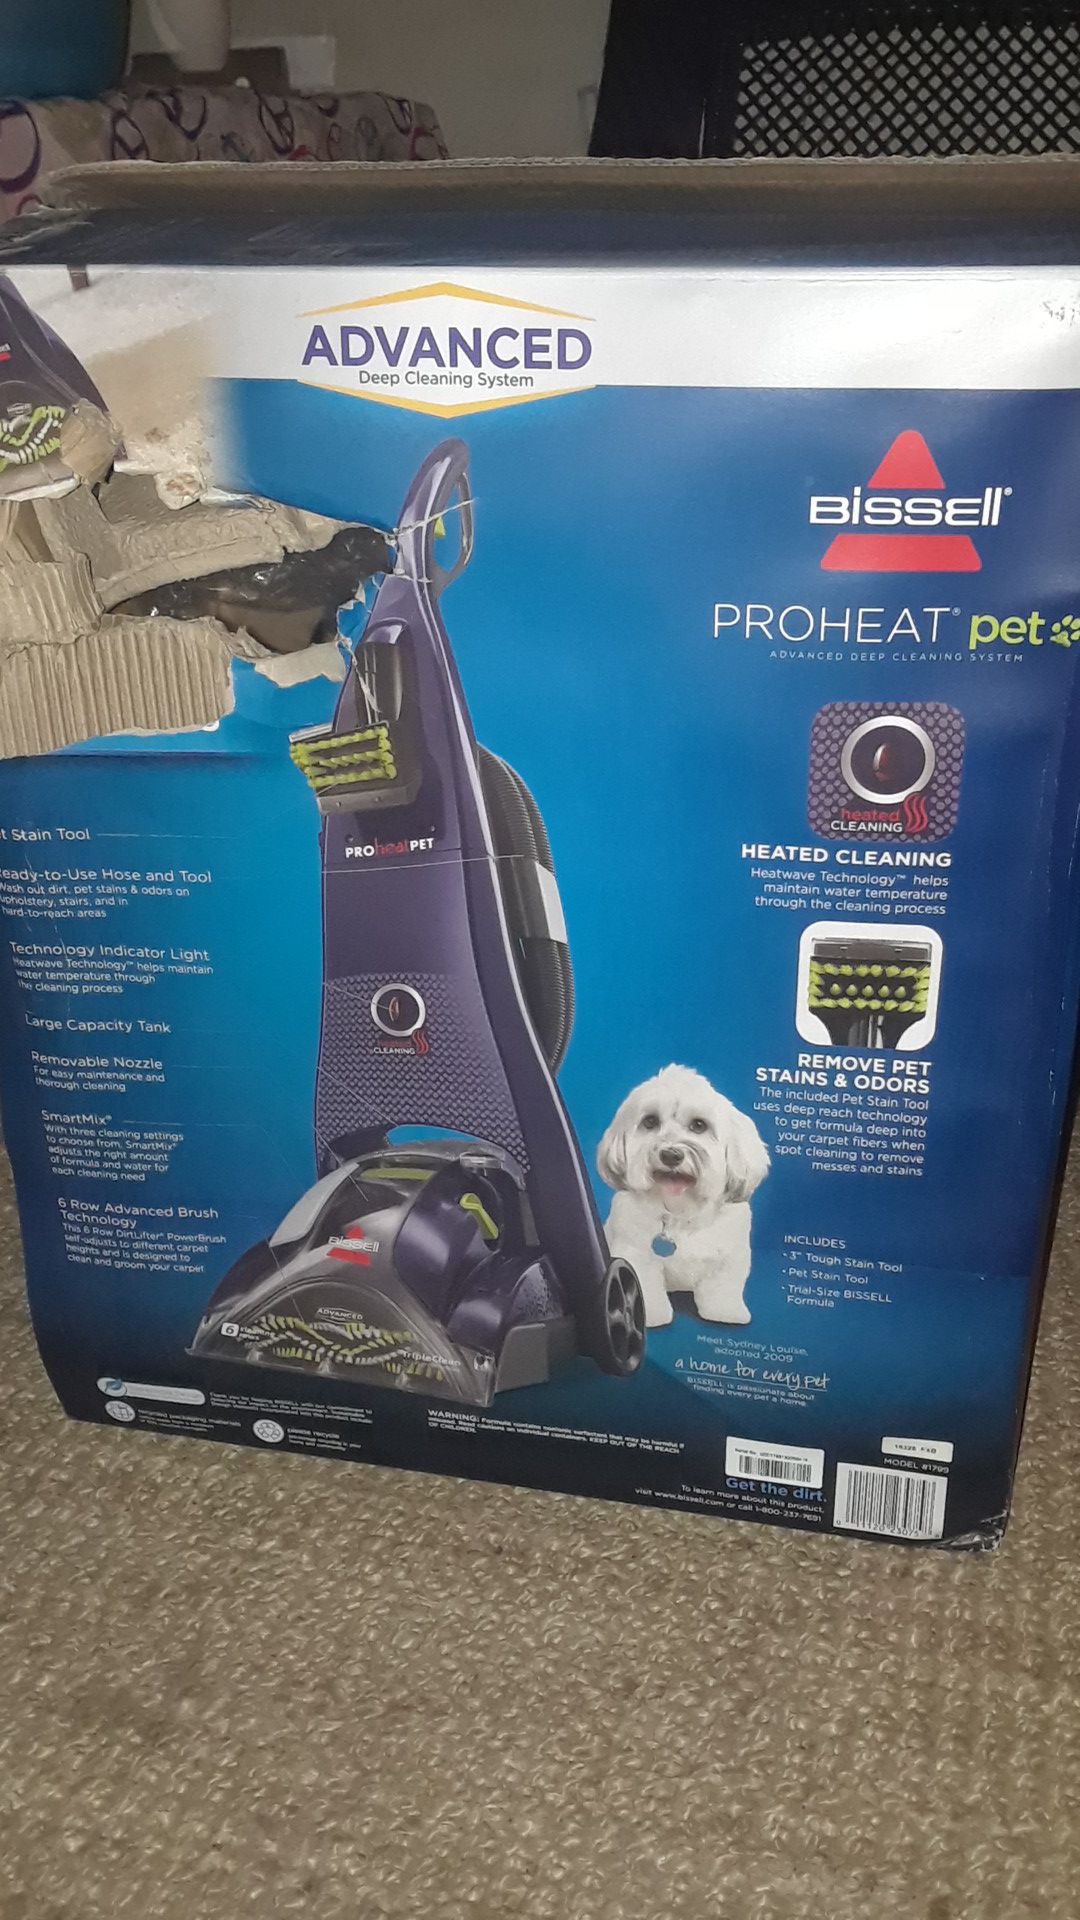 Bissell proheat pet heated cleaning